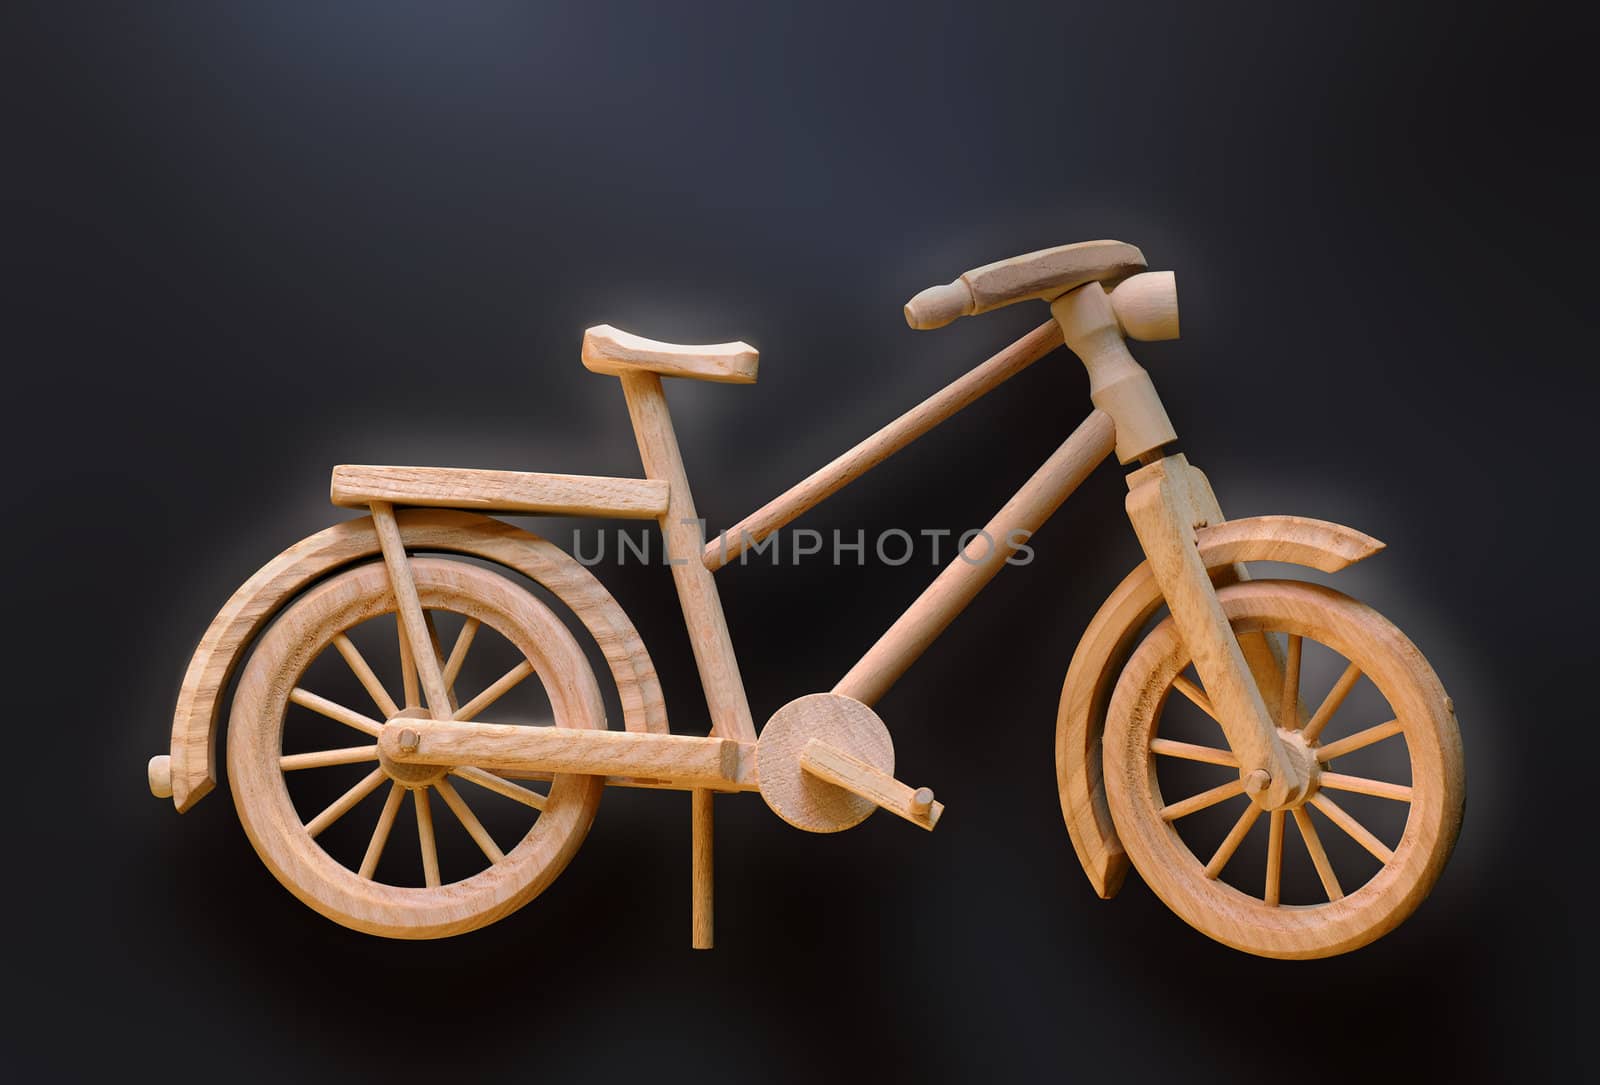 Wooden miniature model of bicycle